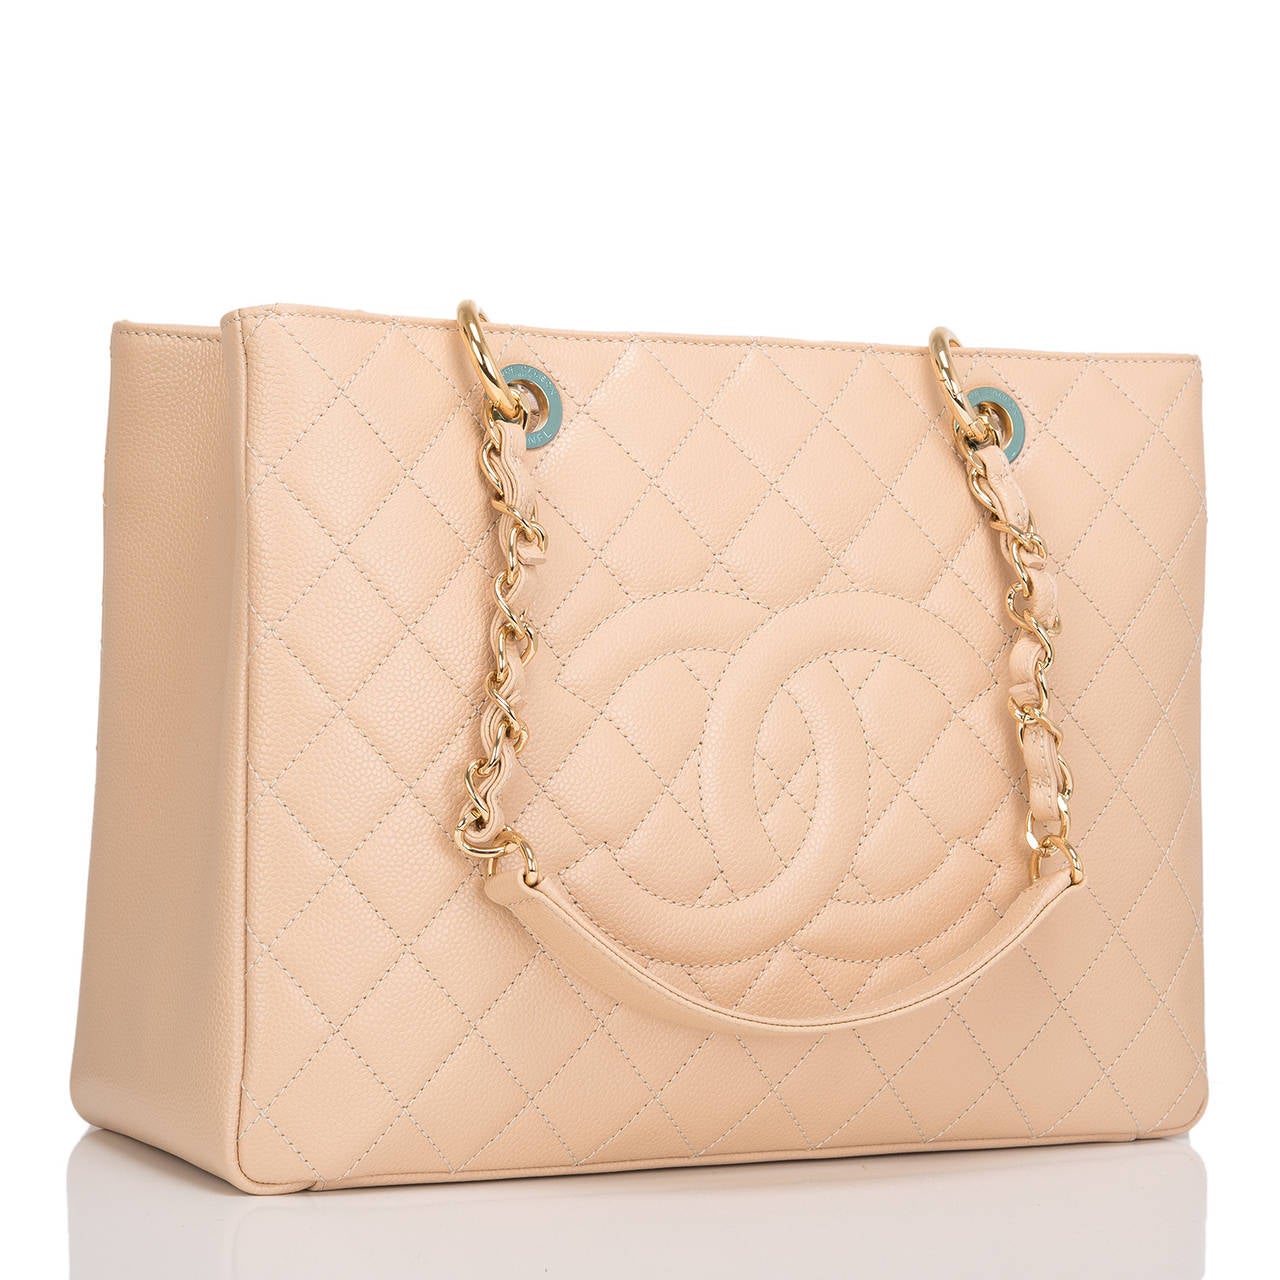 Chanel beige quilted caviar leather Grand Shopper Tote (GST) bag with gold tone hardware.

This style features a front stitched CC logo, half moon back pocket and double interwoven goldtone chain link and leather padded straps.

The interior is